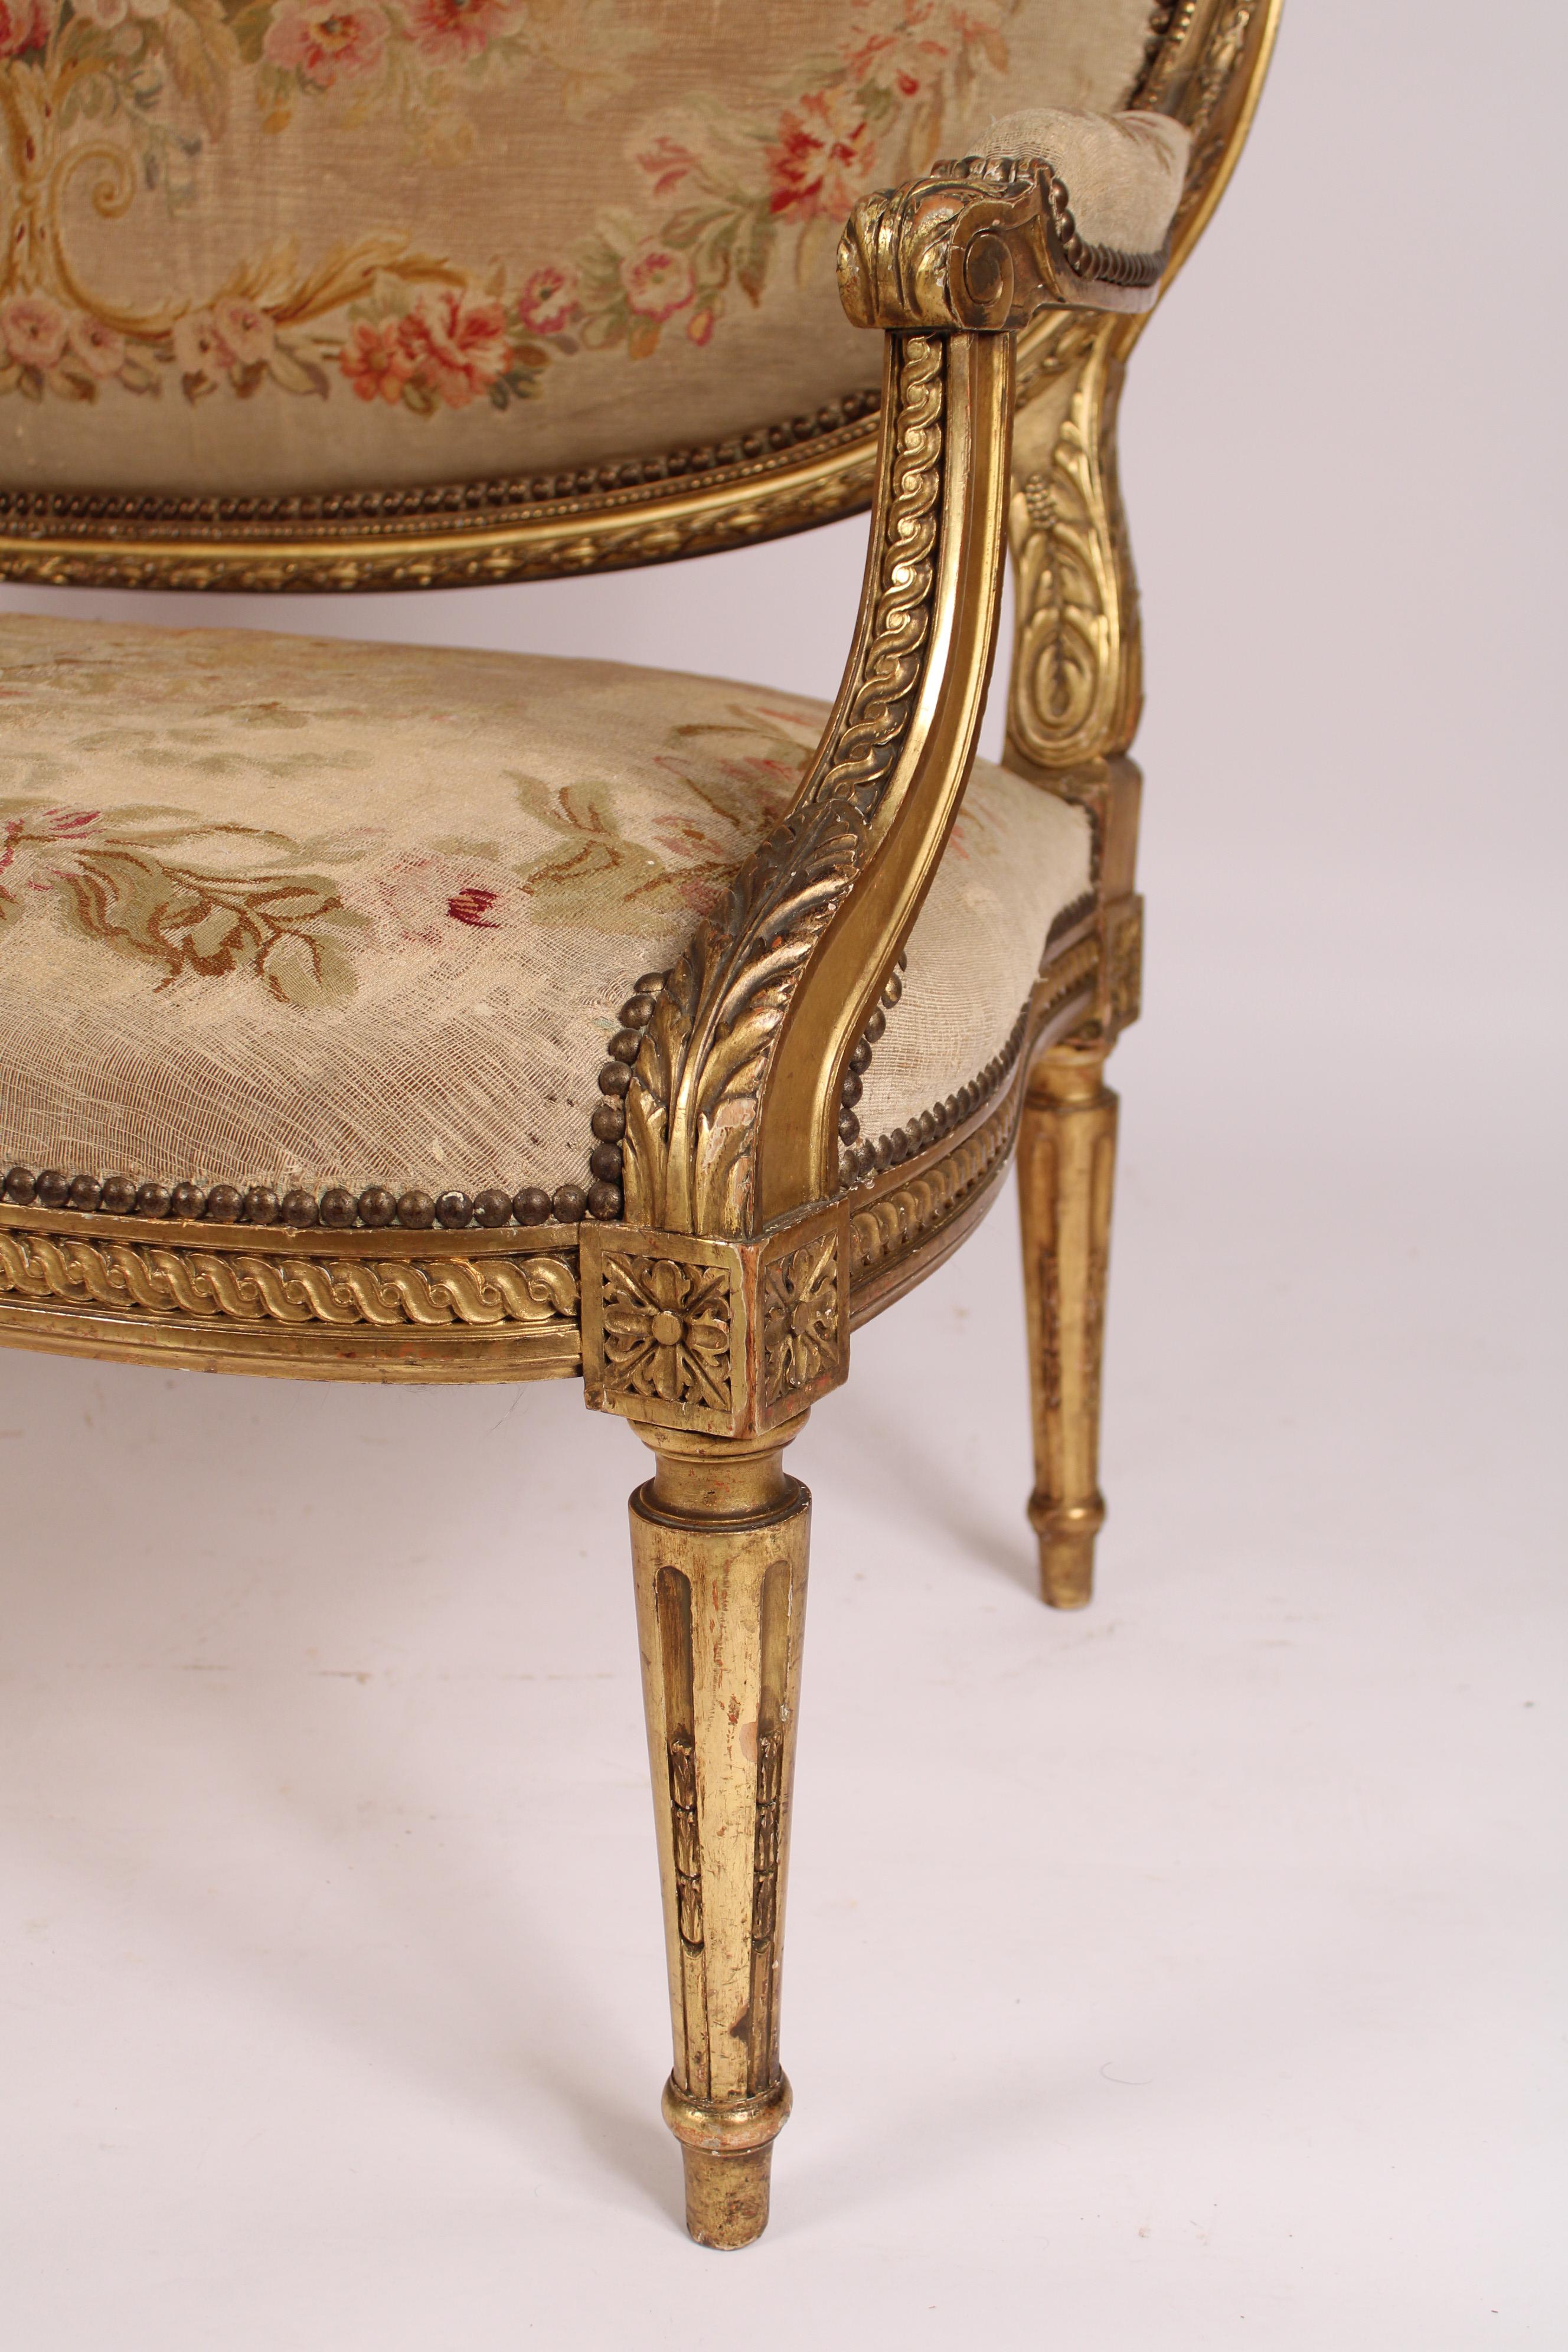 Early 20th Century Antique Louis XVI Style Gilt Wood Settee For Sale